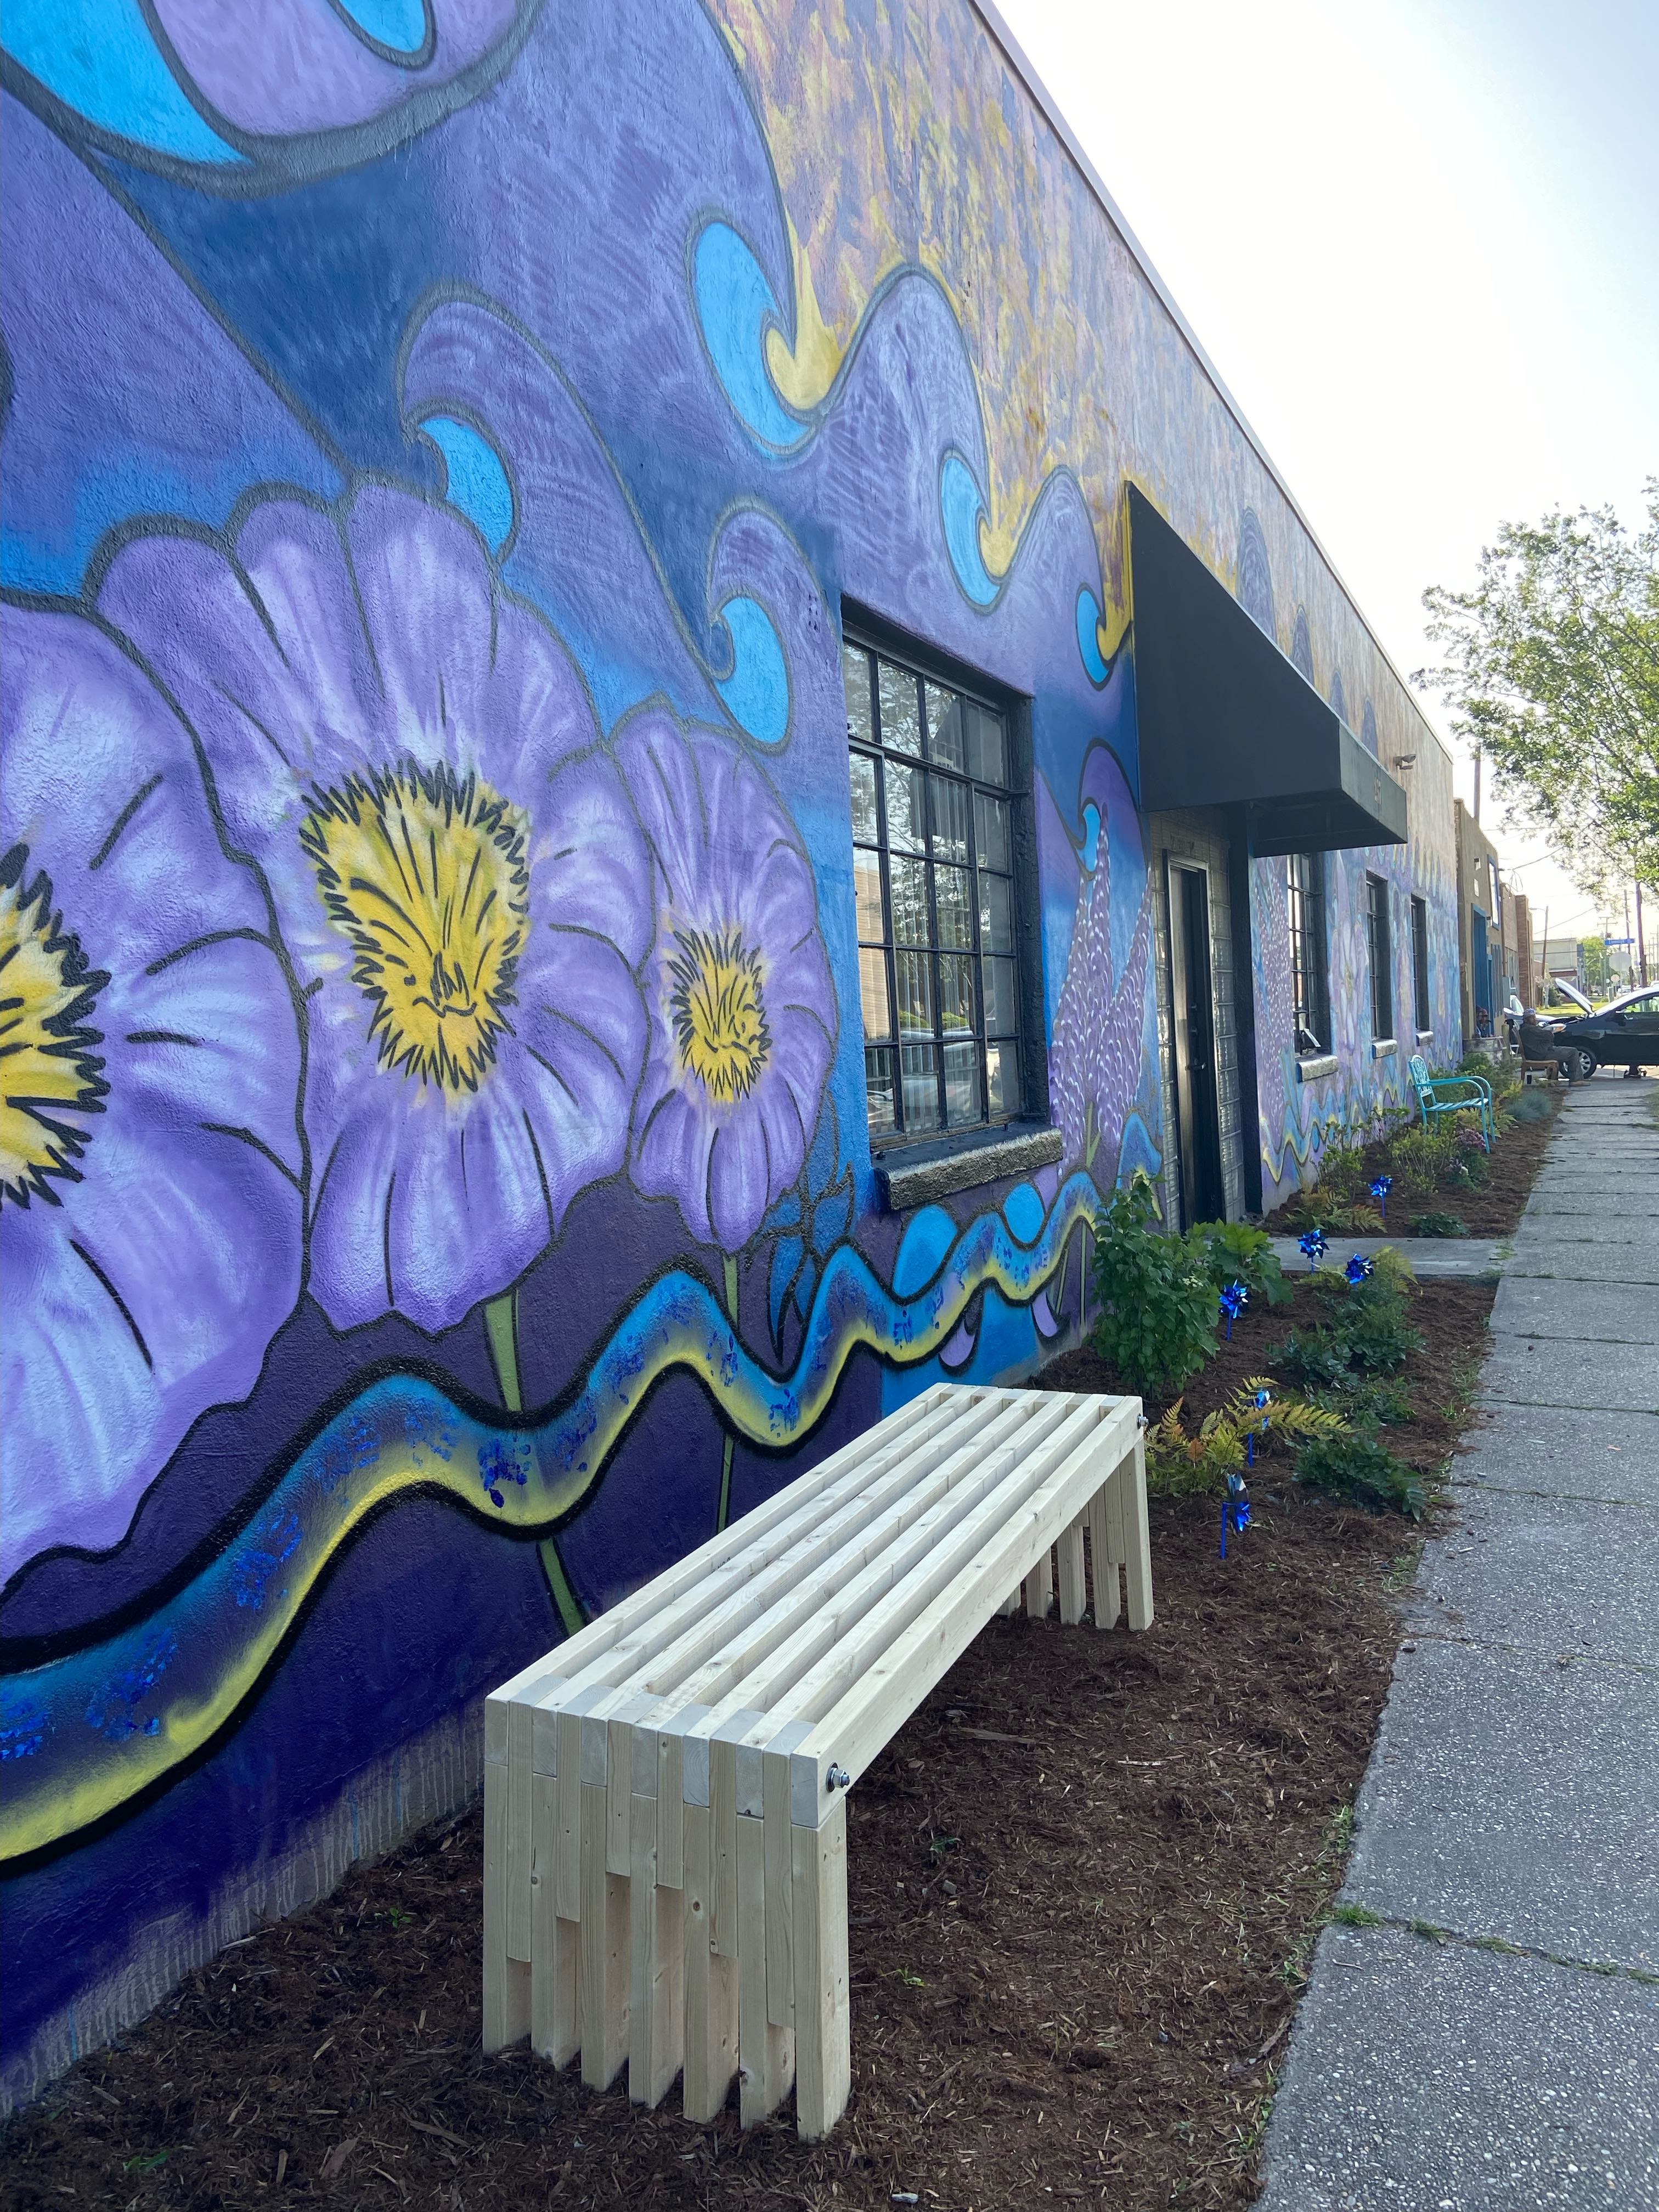 To help raise awareness, Samaritan House partnered with local artist, Parrish Majestic, to paint a mural in Norfolk, VA - the project was sponsored by Drucker + Falk